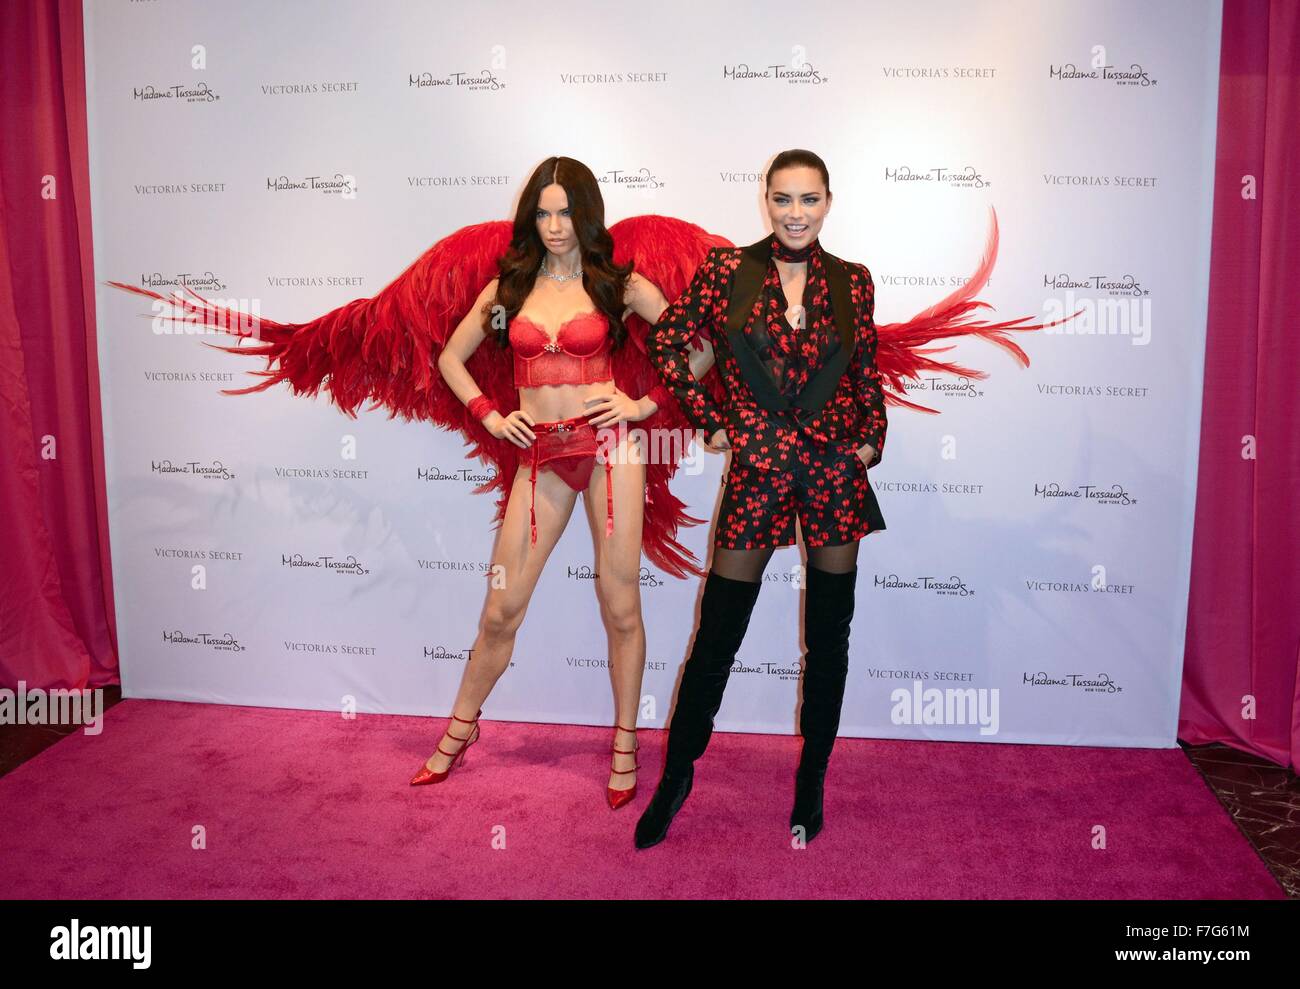 New York, NY, USA. 30th Nov, 2015. Adriana Lima at a public appearance for Madame Tussauds Unveils Wax Figure of Adriana Lima, Victoria's Secret Herald Square, New York, NY November 30, 2015. © Derek Storm/Everett Collection/Alamy Live News Stock Photo